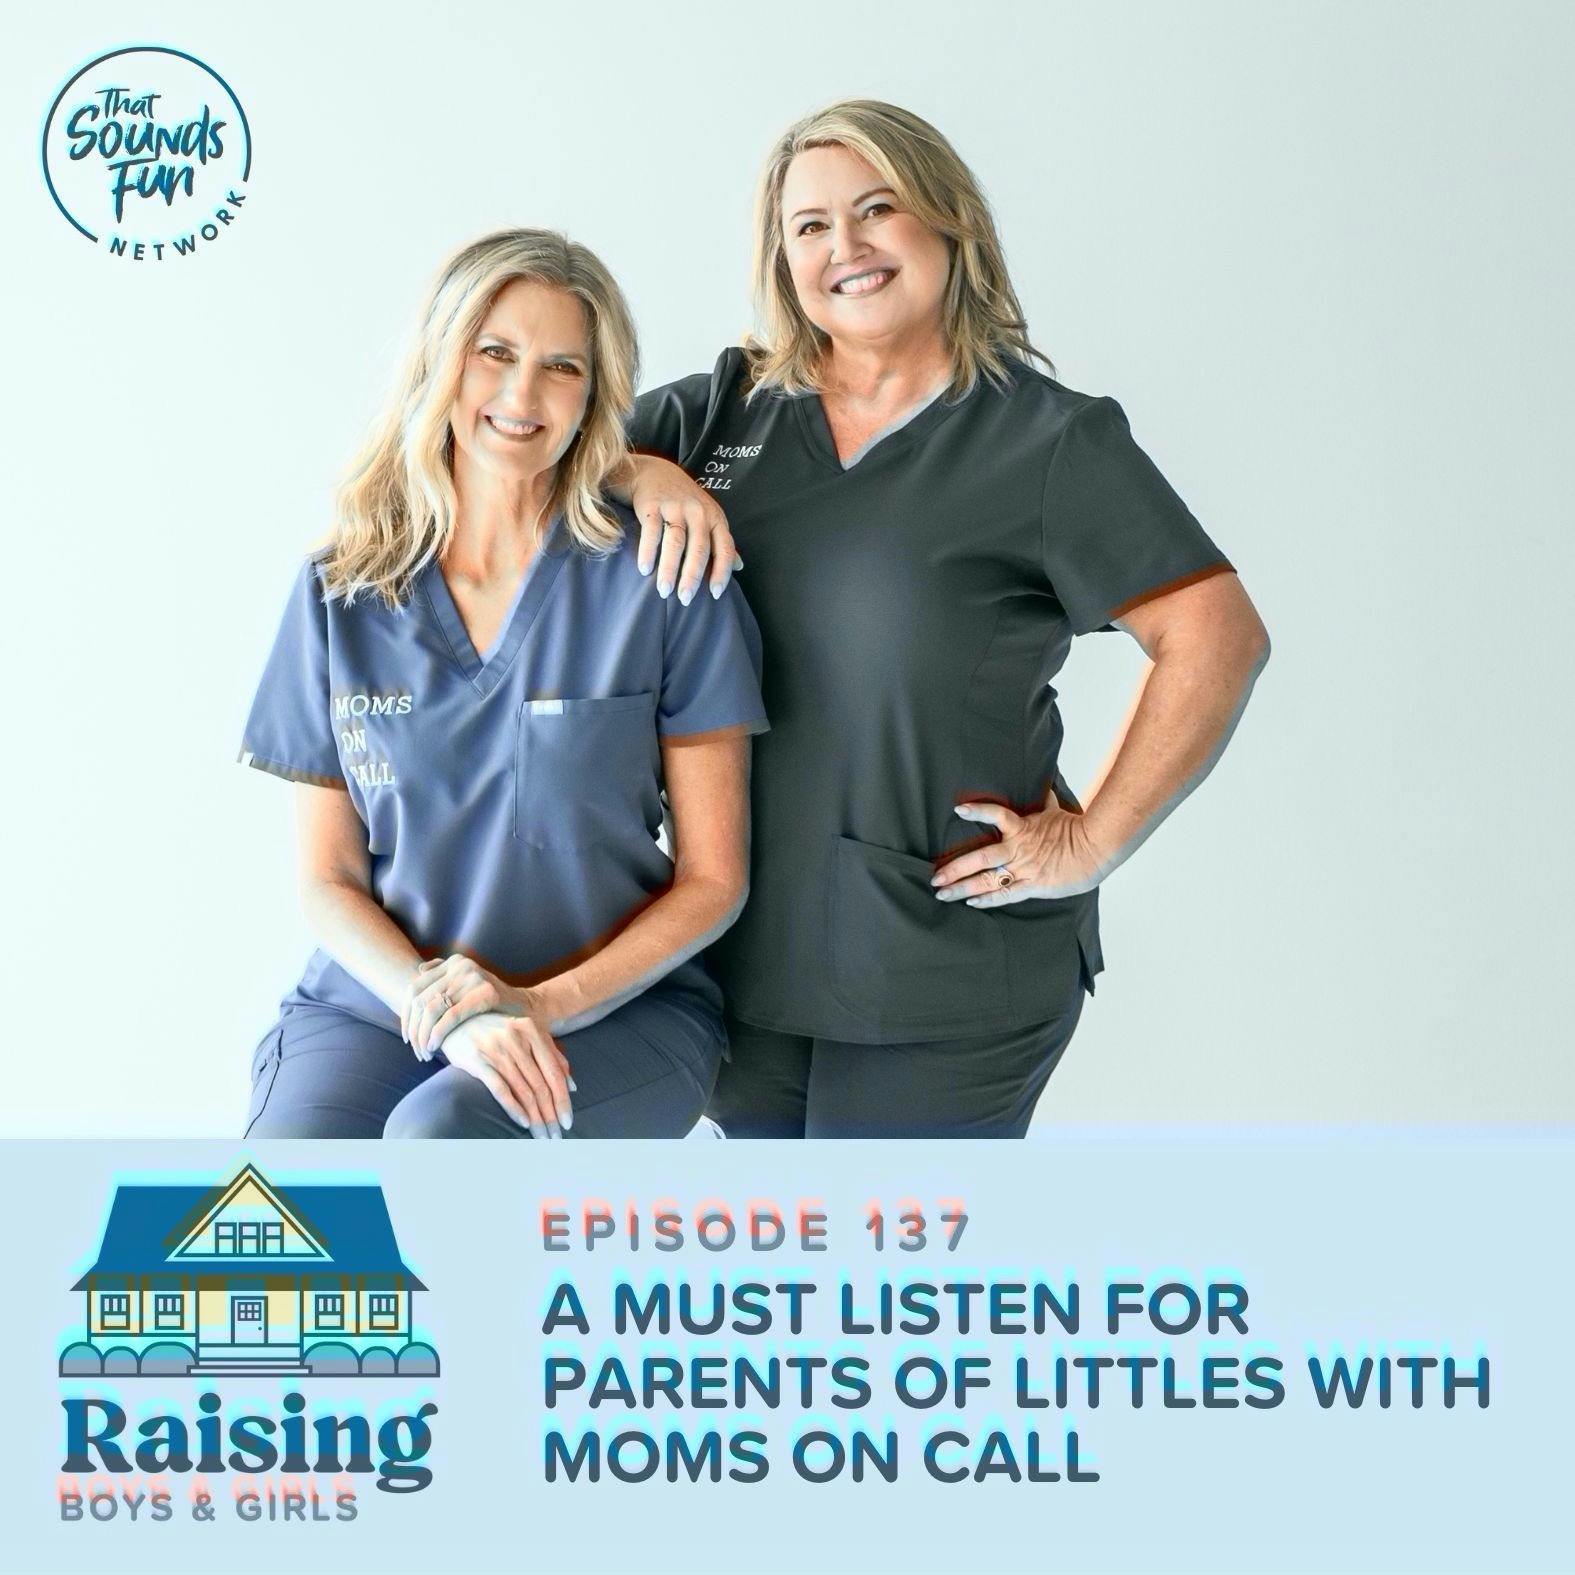 Episode 137: A Must Listen for Parents of Littles with Moms on Call